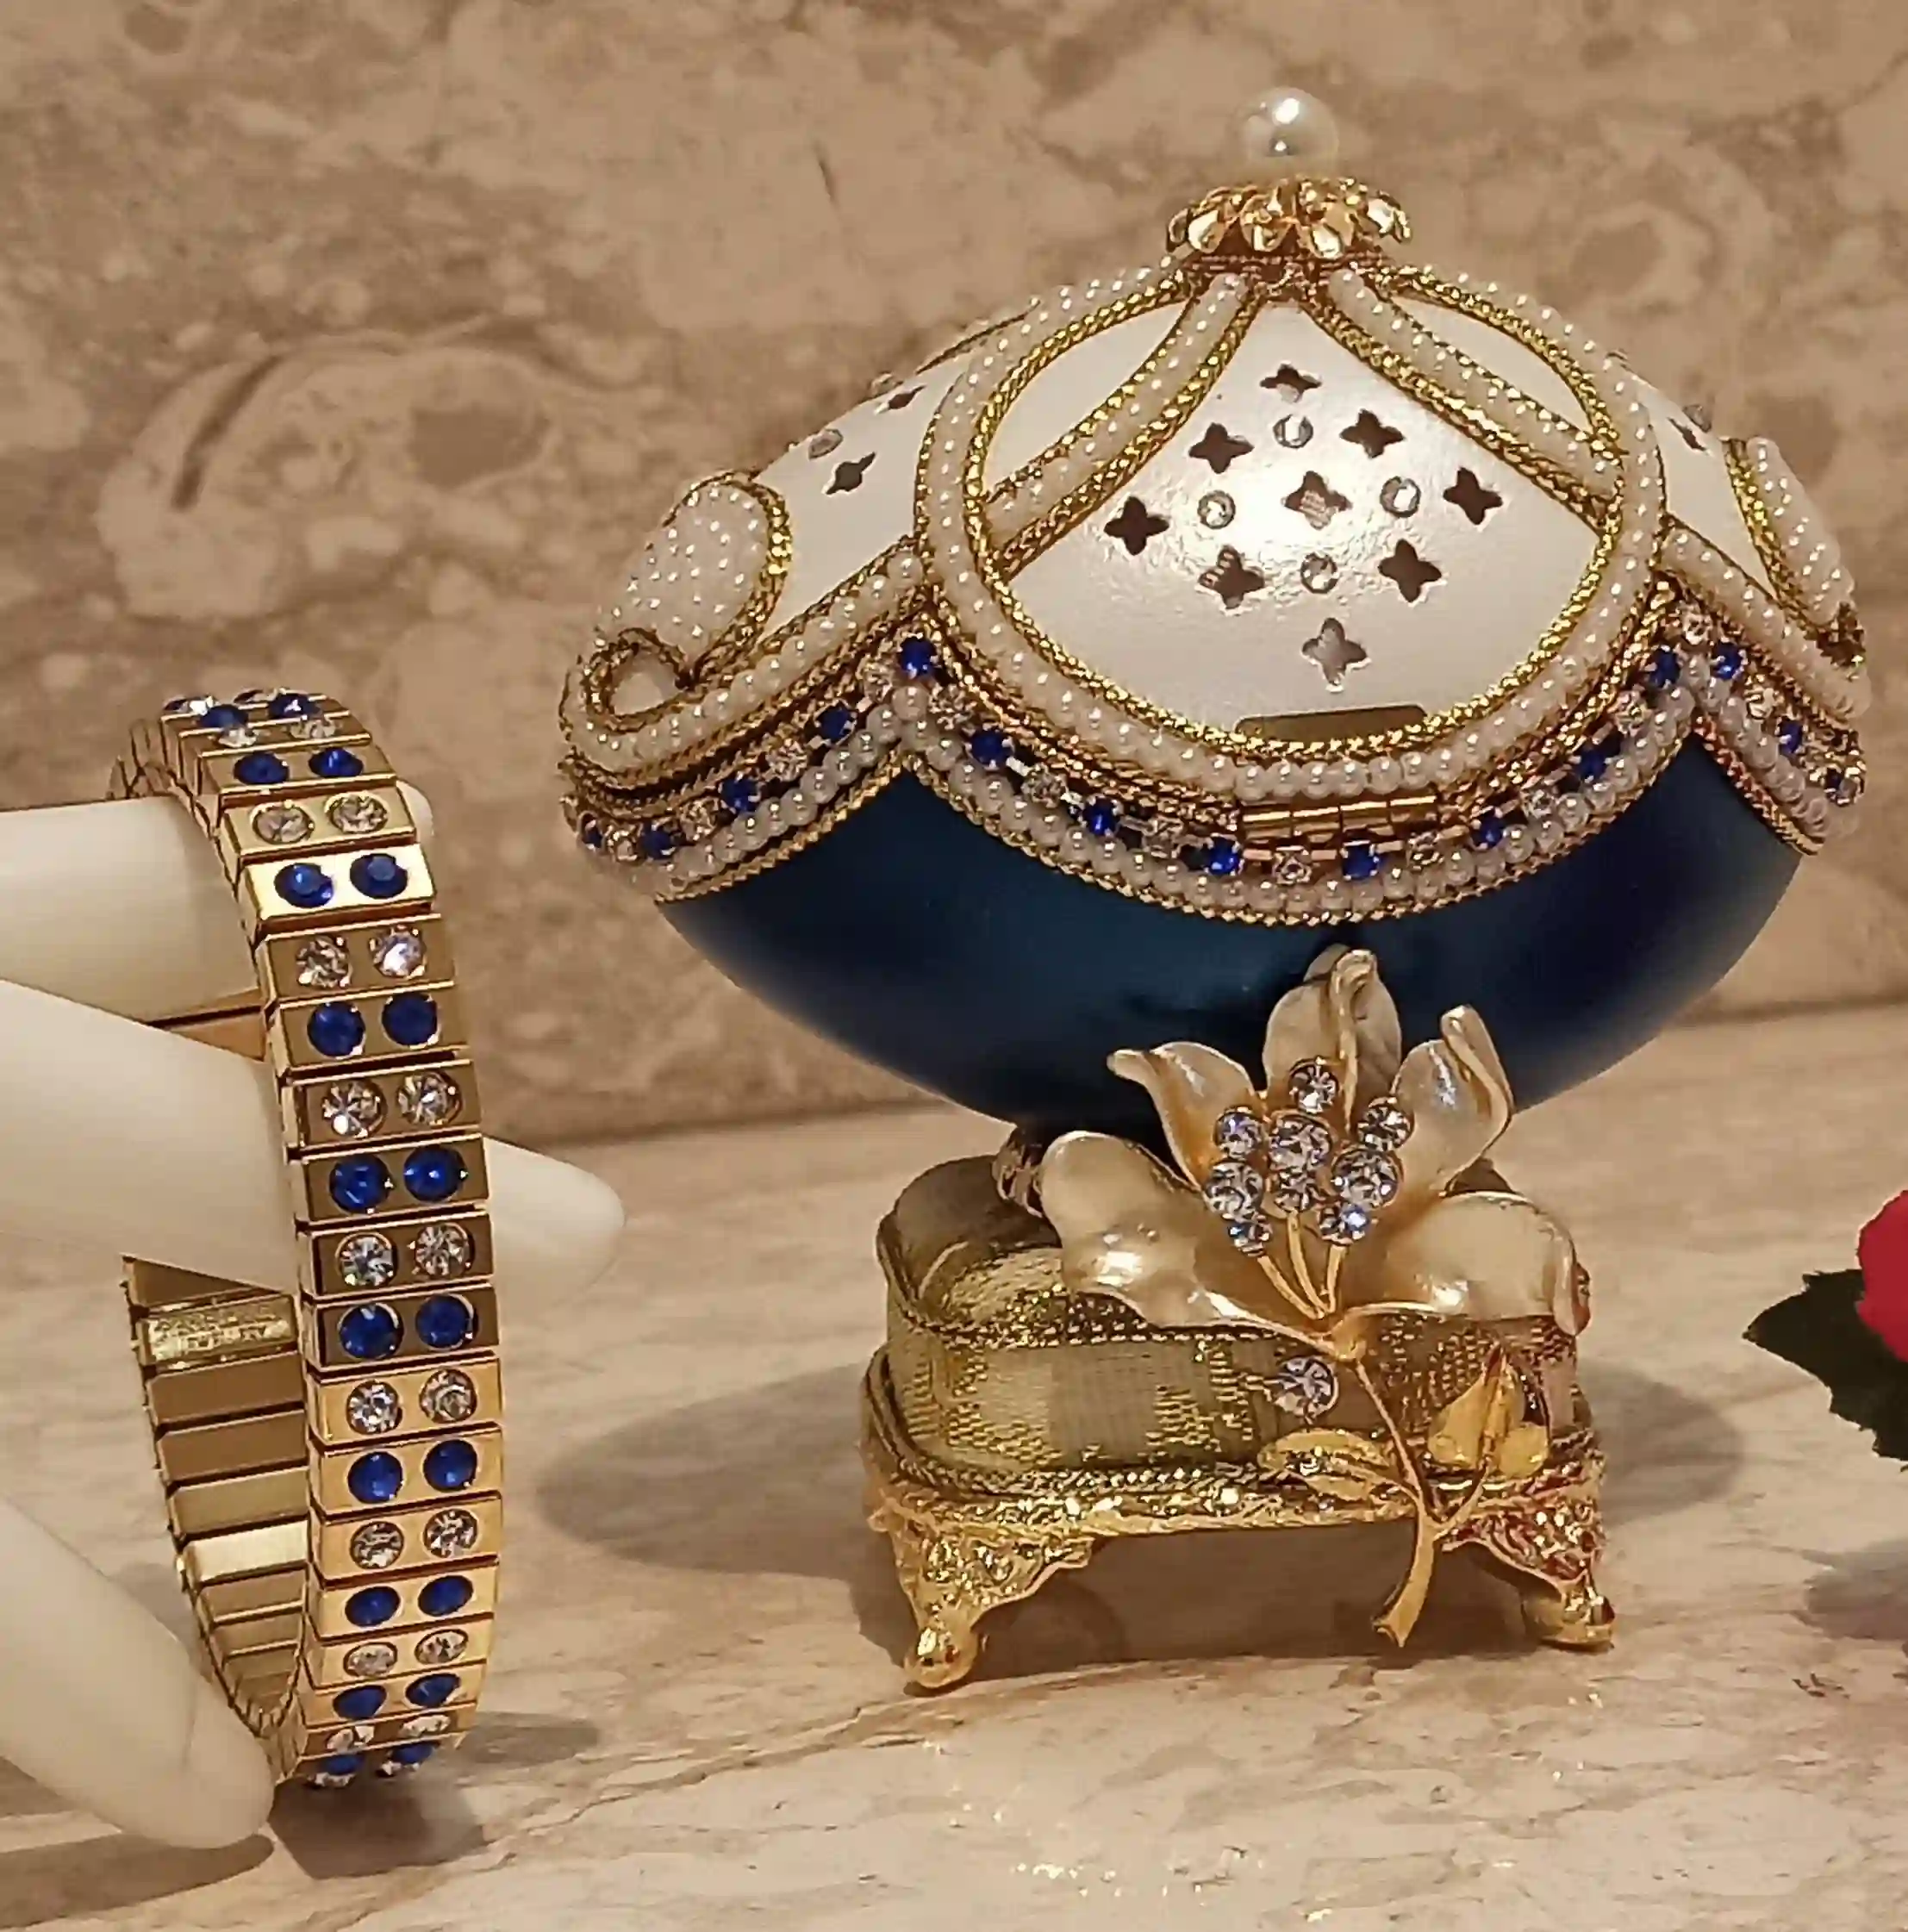 FABERGE Egg, Gift for Couple Wedding ,ONE Of a Kind, Unique Wedding gift ideas ,Mother In Law Gift, FAberge MUSIC box ,Sapphire , 24k Gold 